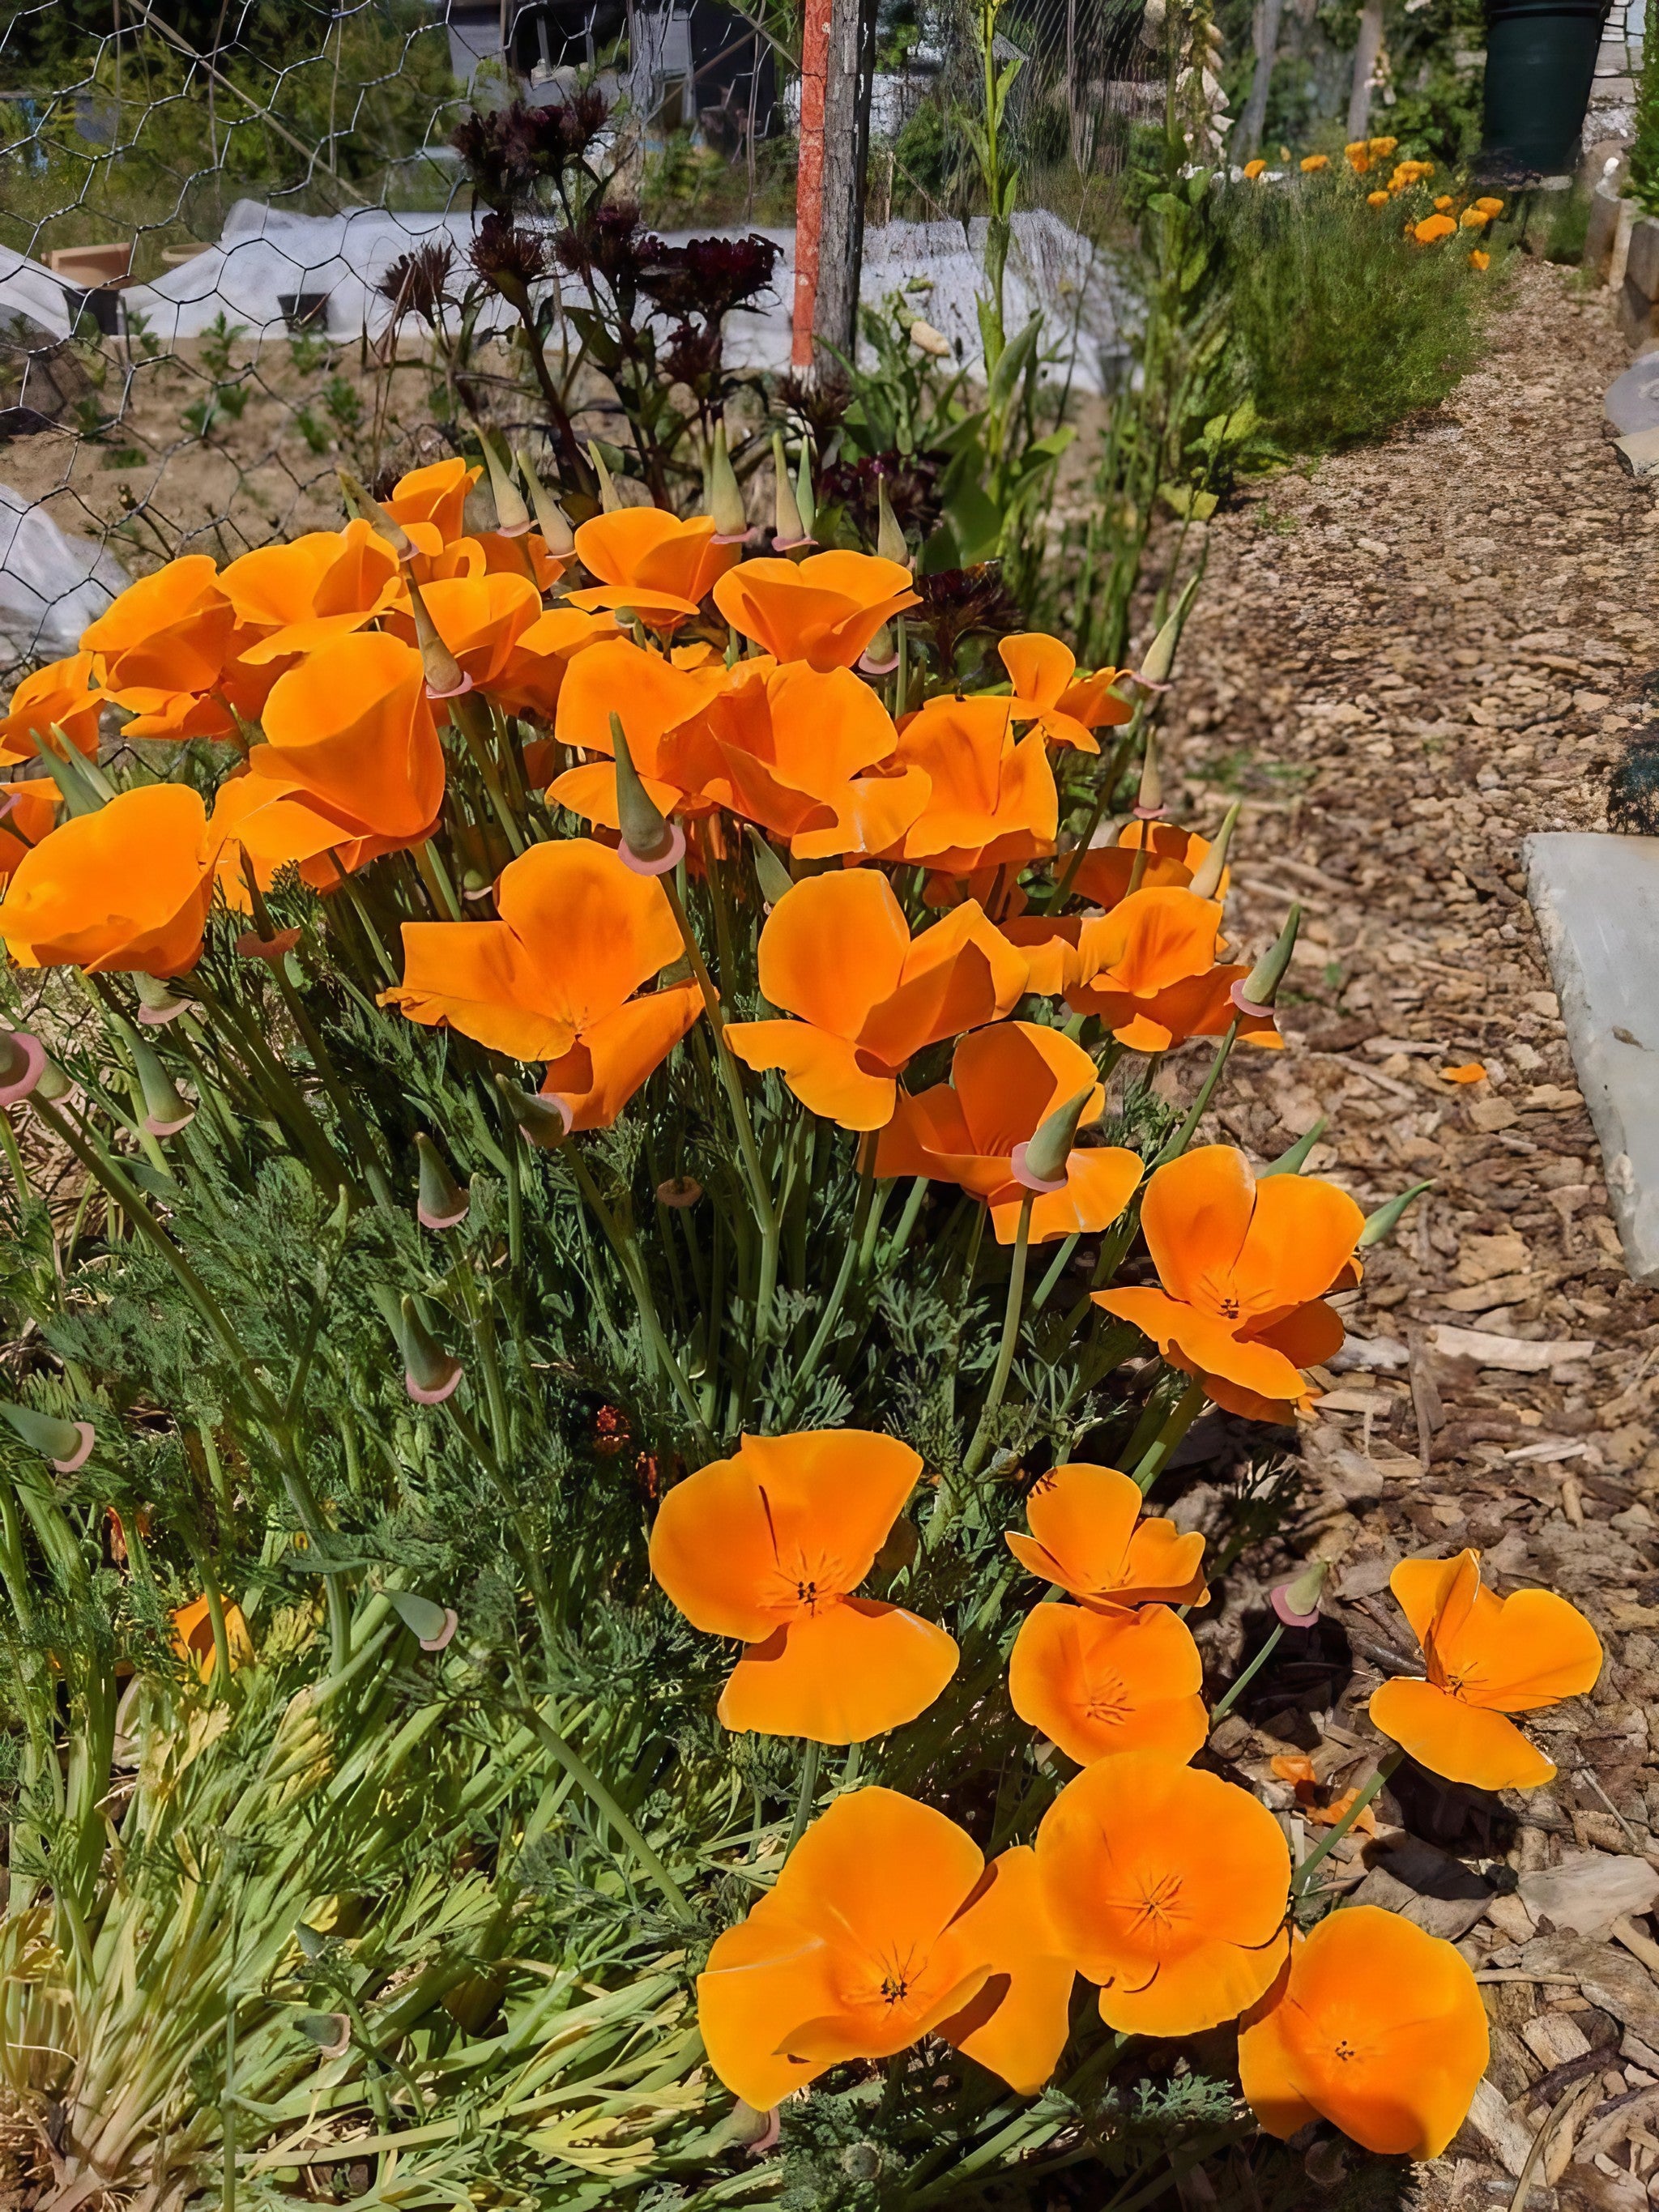 Pathway lined with Golden West California poppies in a garden